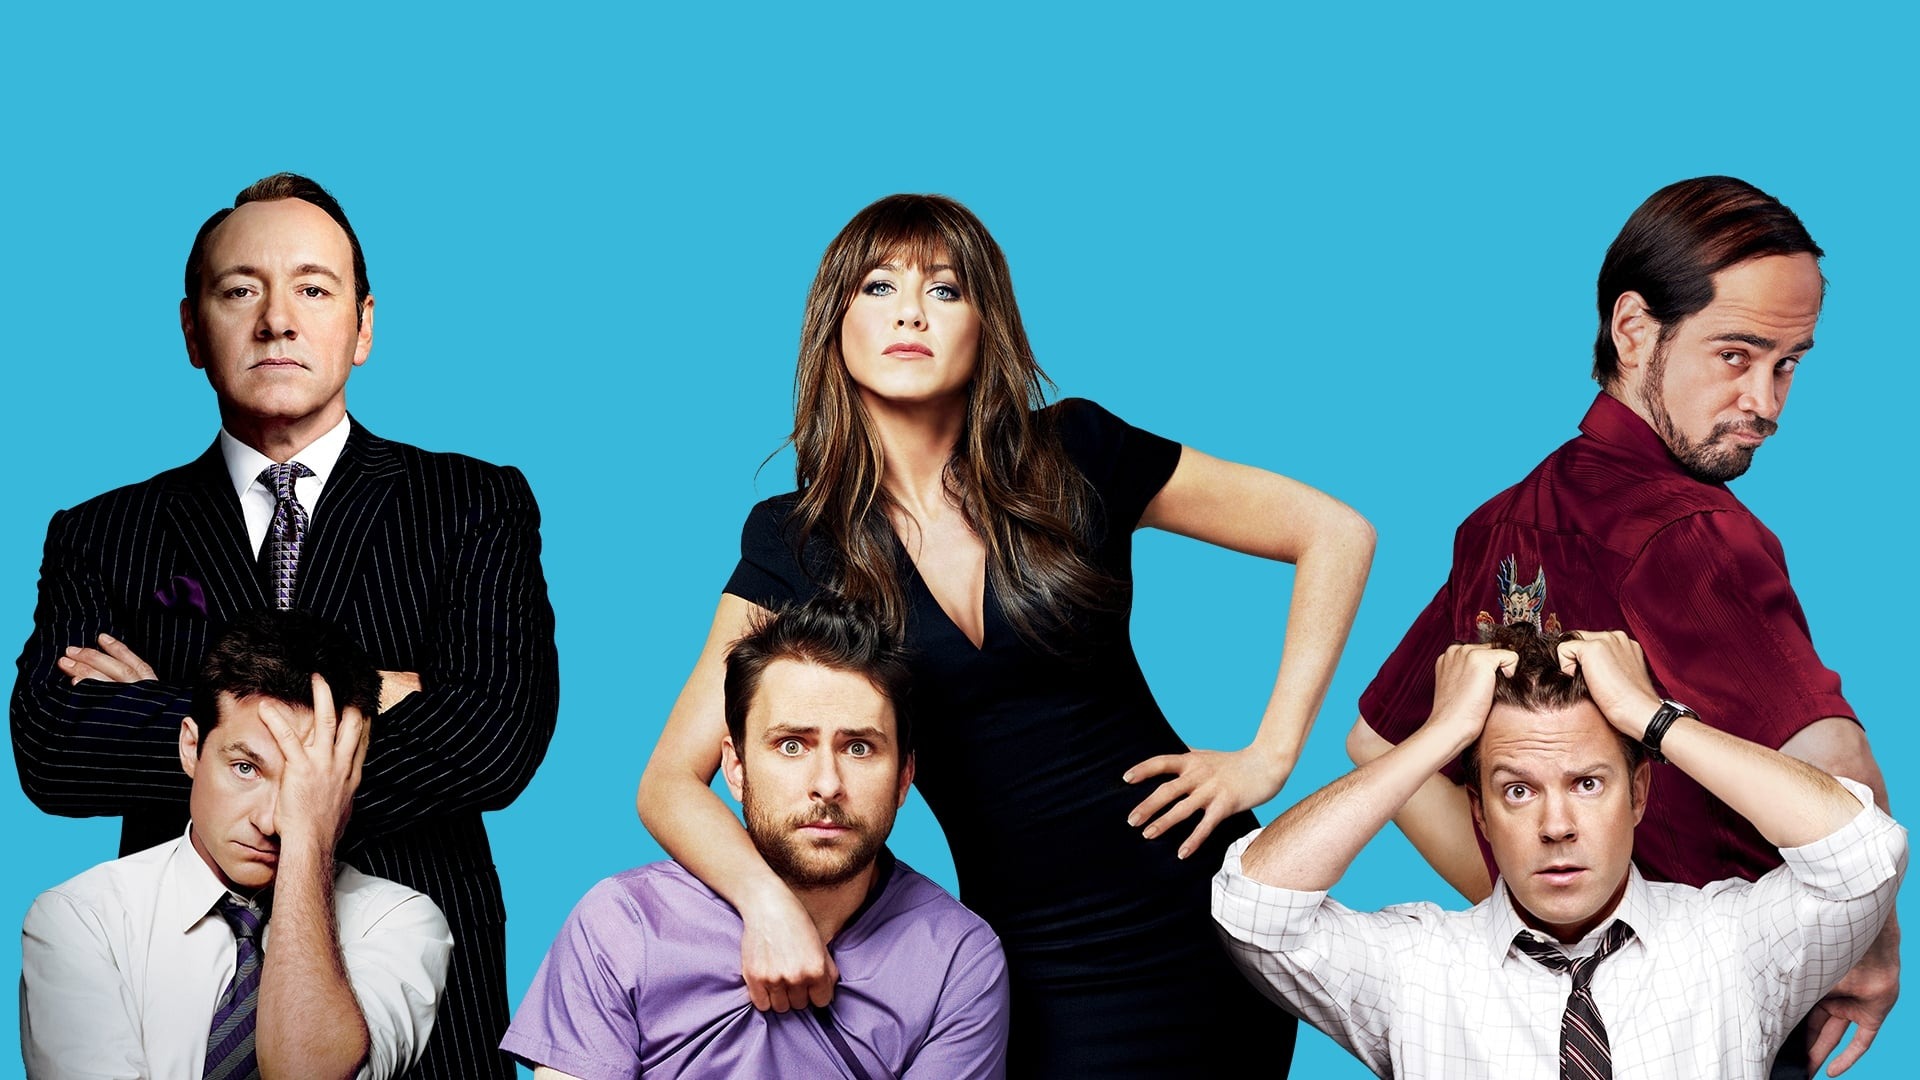 How To Watch Horrible Bosses